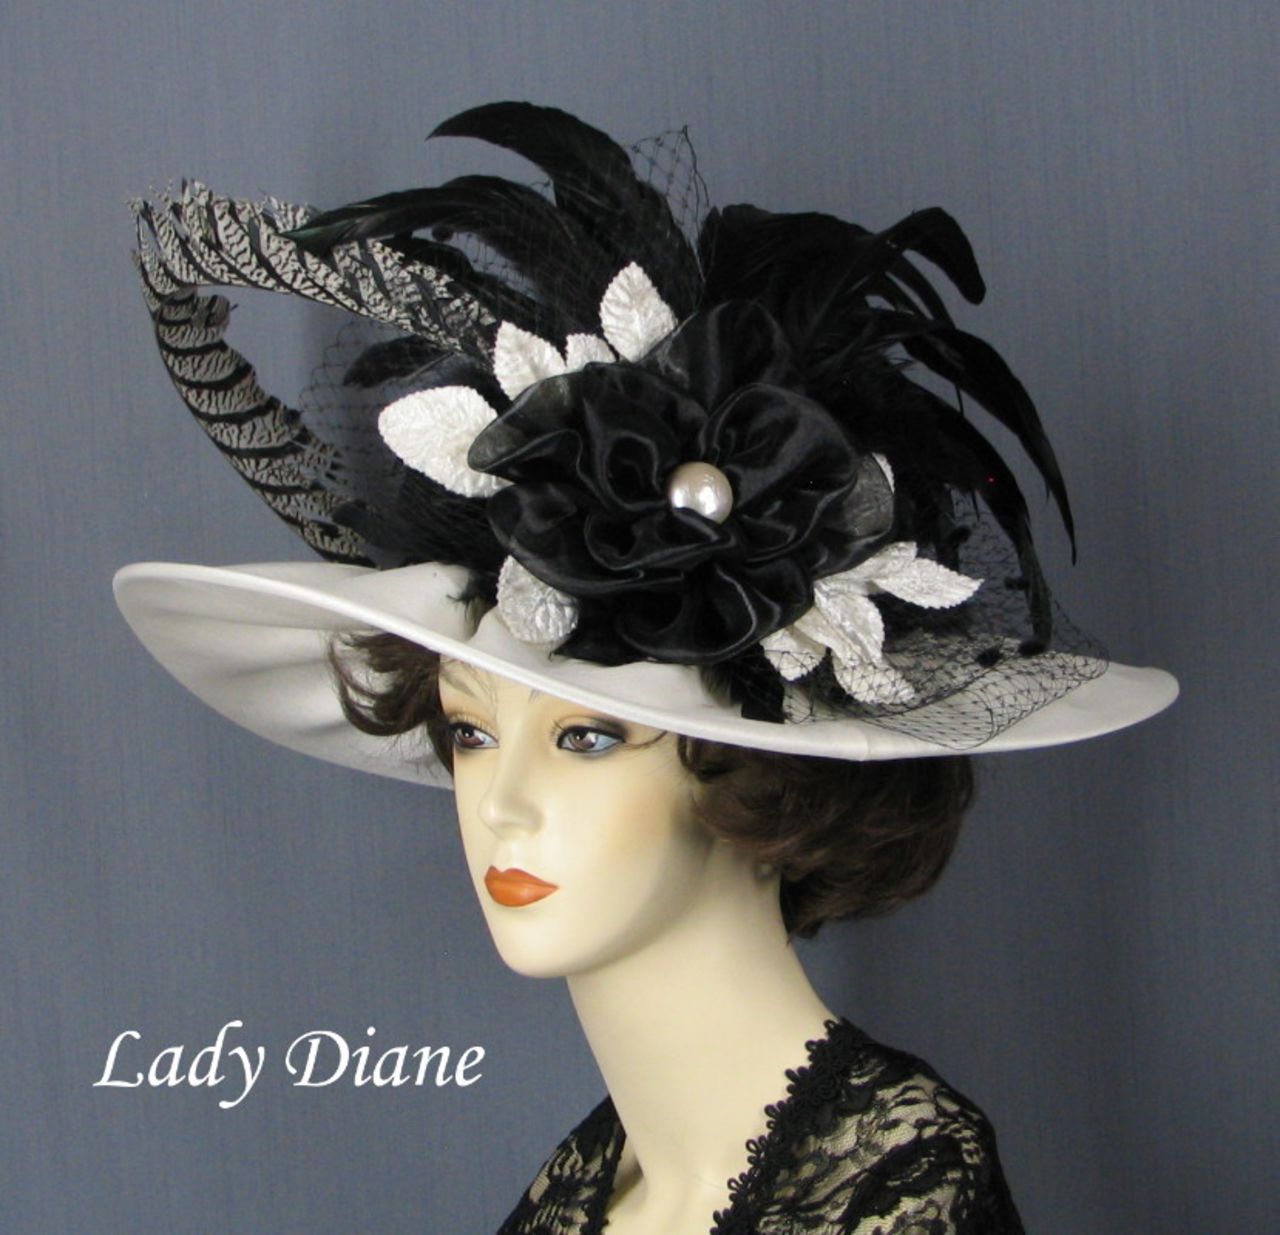 Diane Siverson, of <a href="http://www.ladydianehats.com/index.html" target="_blank" target="_blank">Lady Diane Hats</a>, is proud of her "Morning Star" hat. The design inspires her customers to order similar customized hats. 